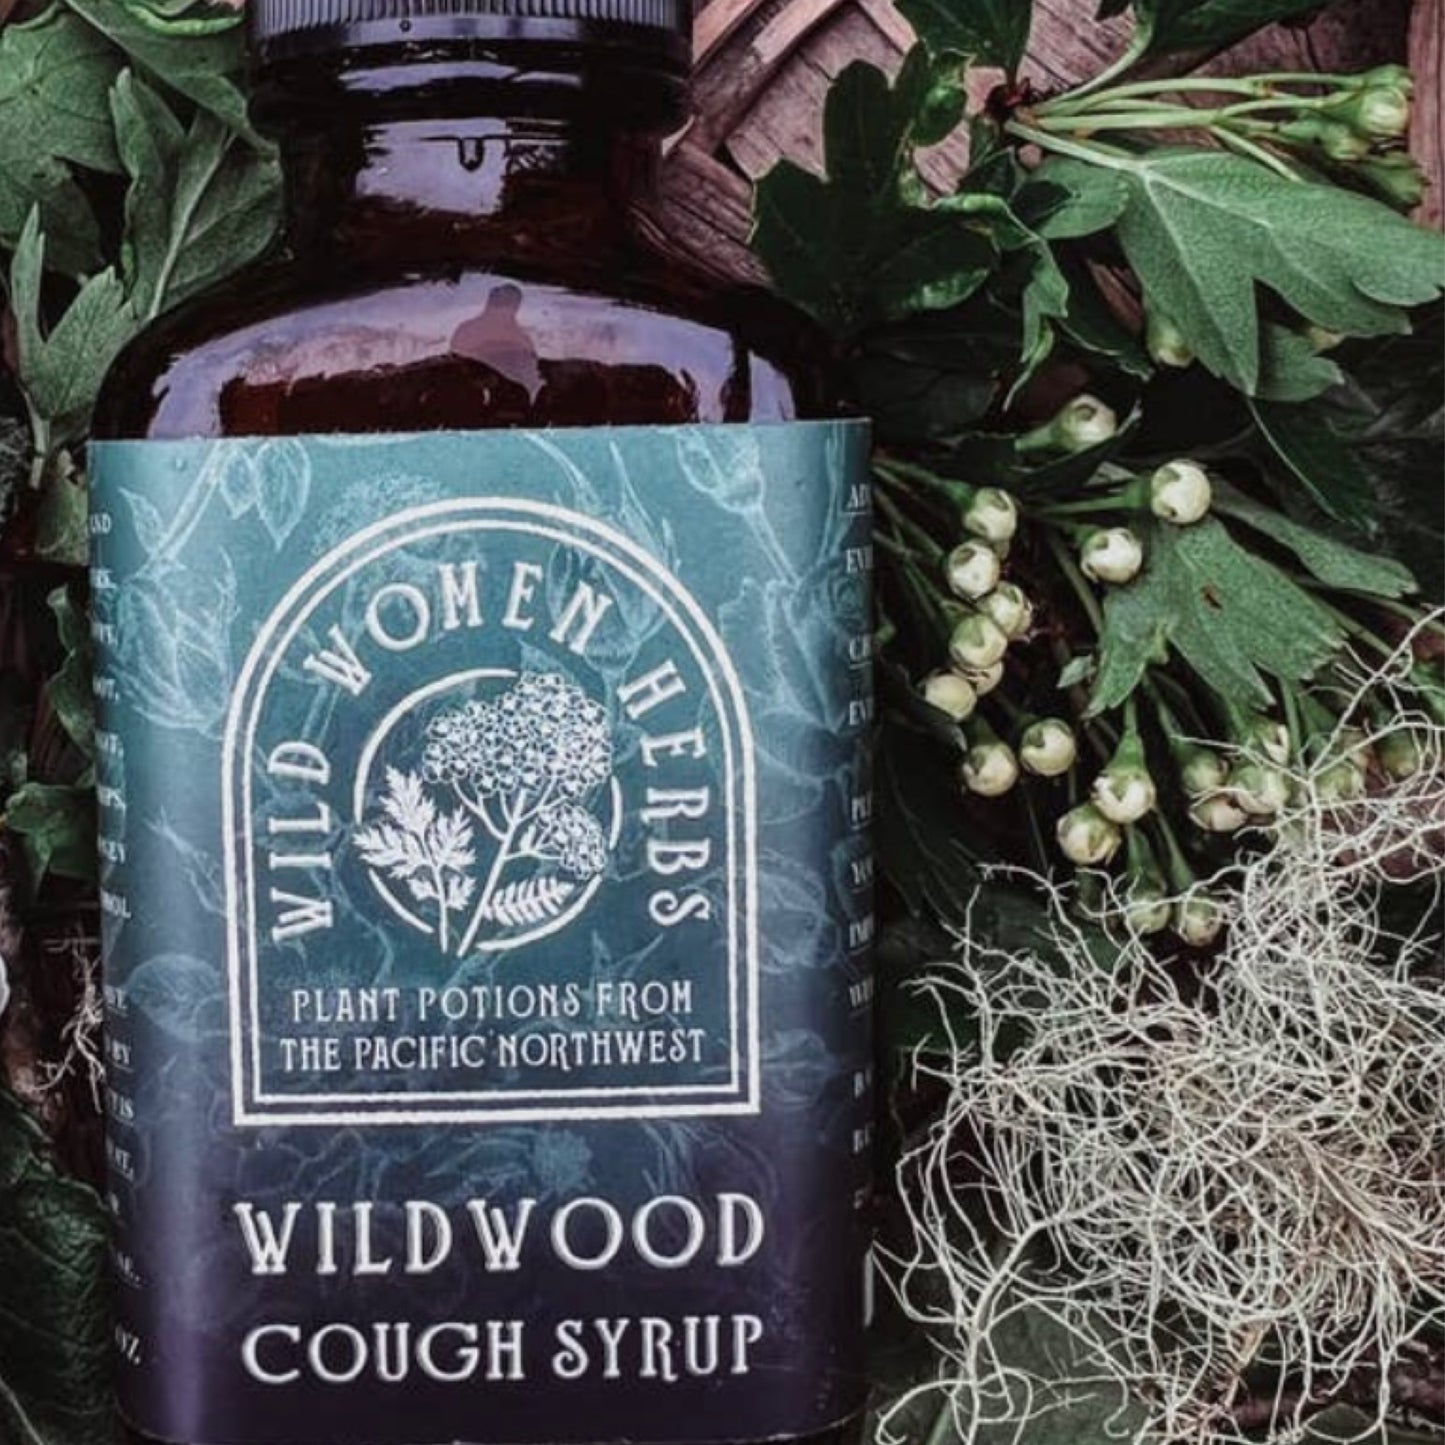 Wildwood Cough Syrup